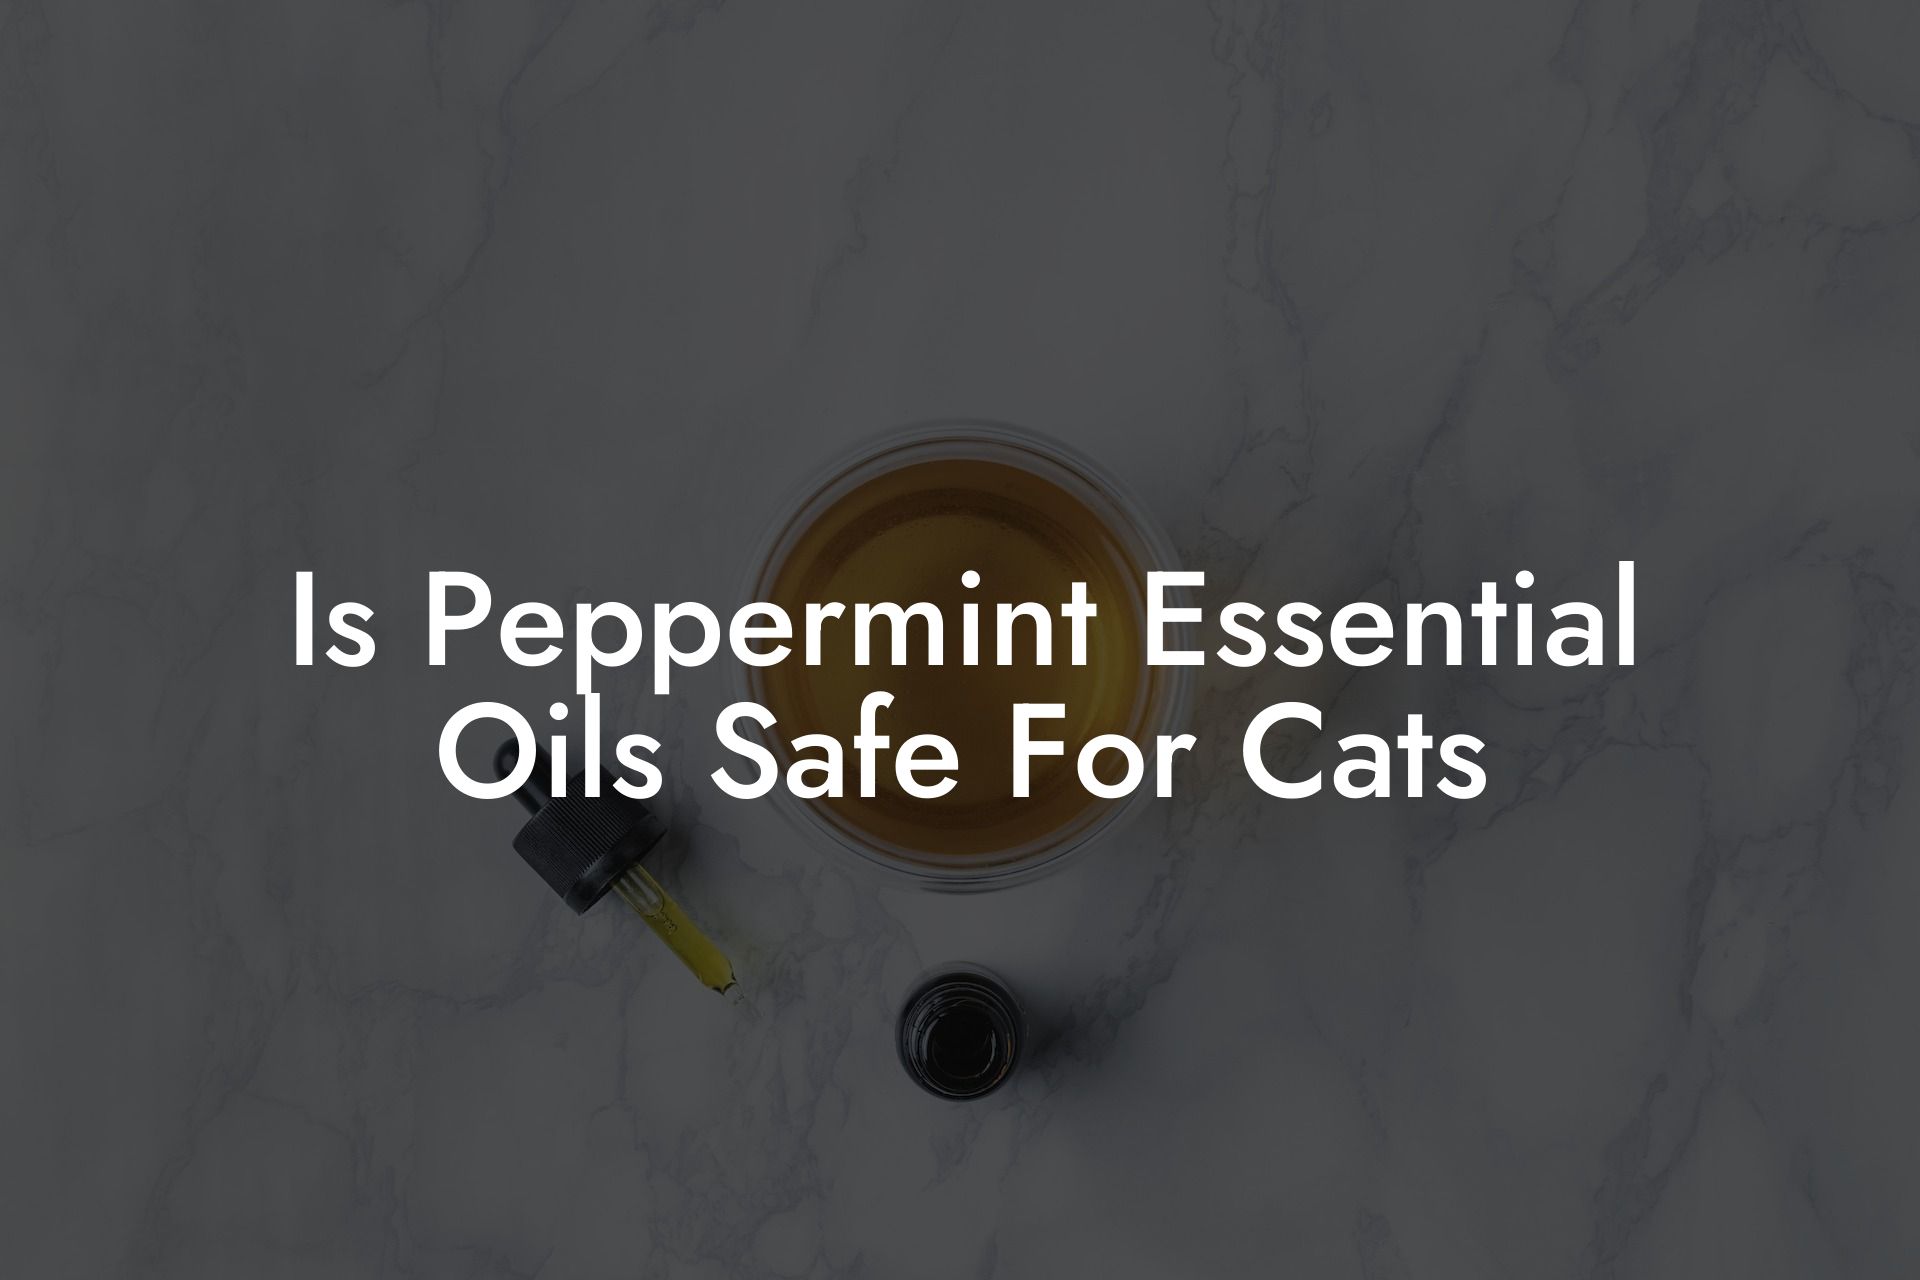 Is Peppermint Essential Oils Safe For Cats